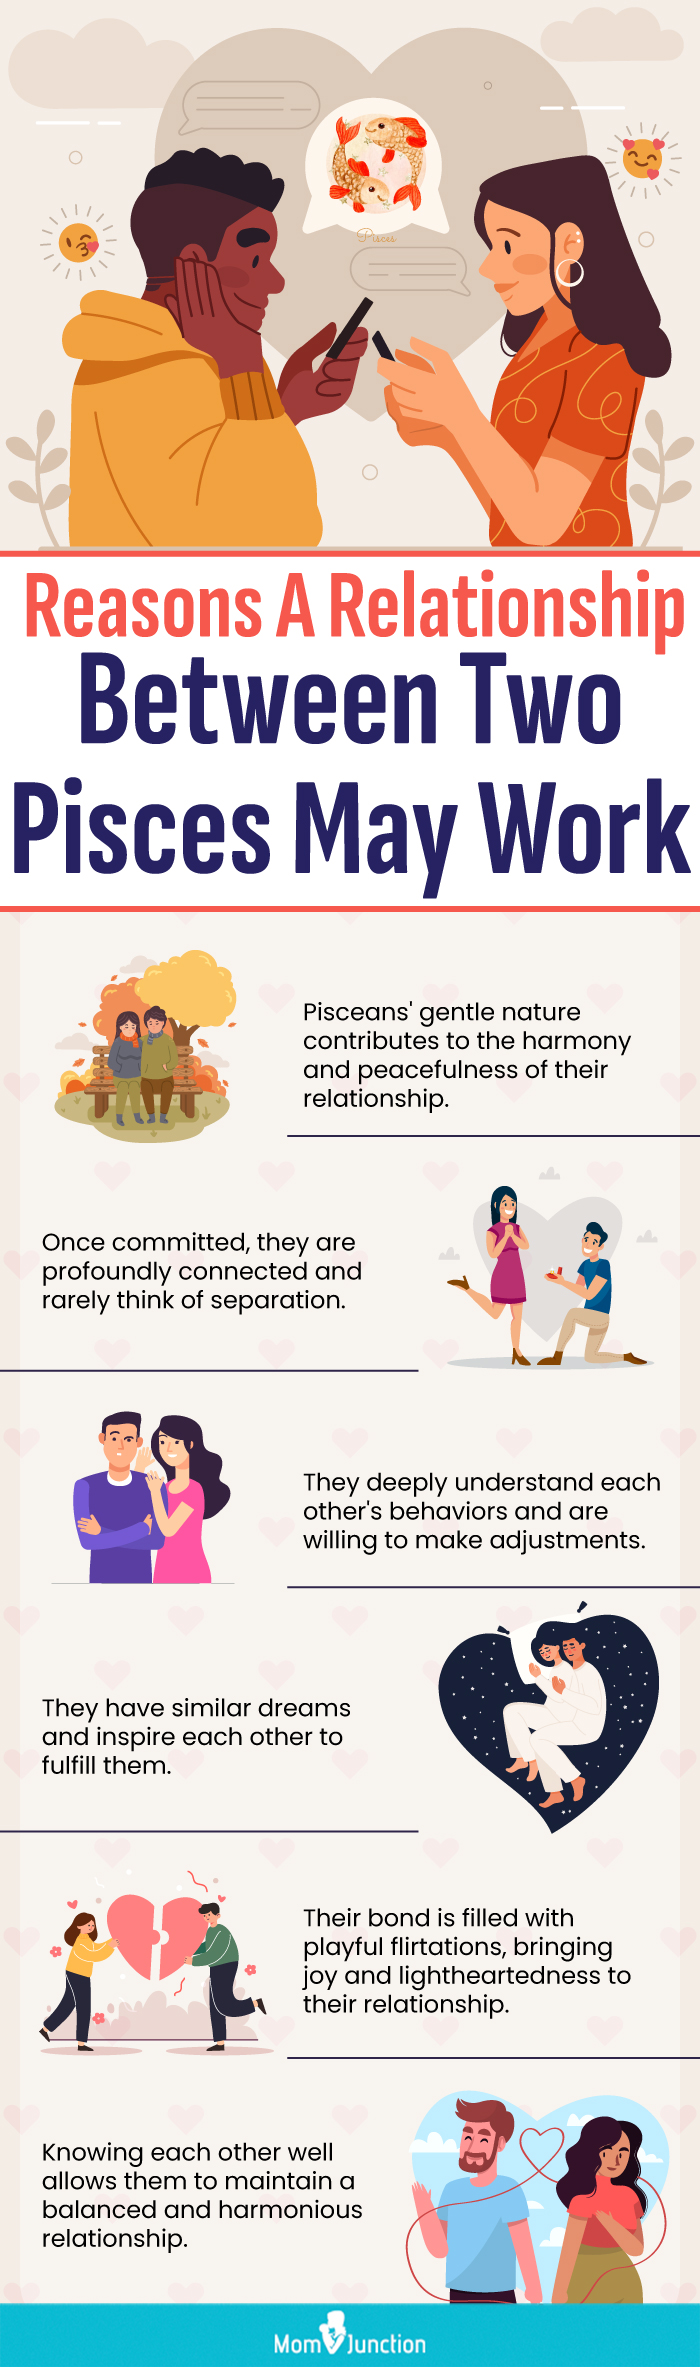 reasons why a relationship between two pisces individuals may work (infographic)